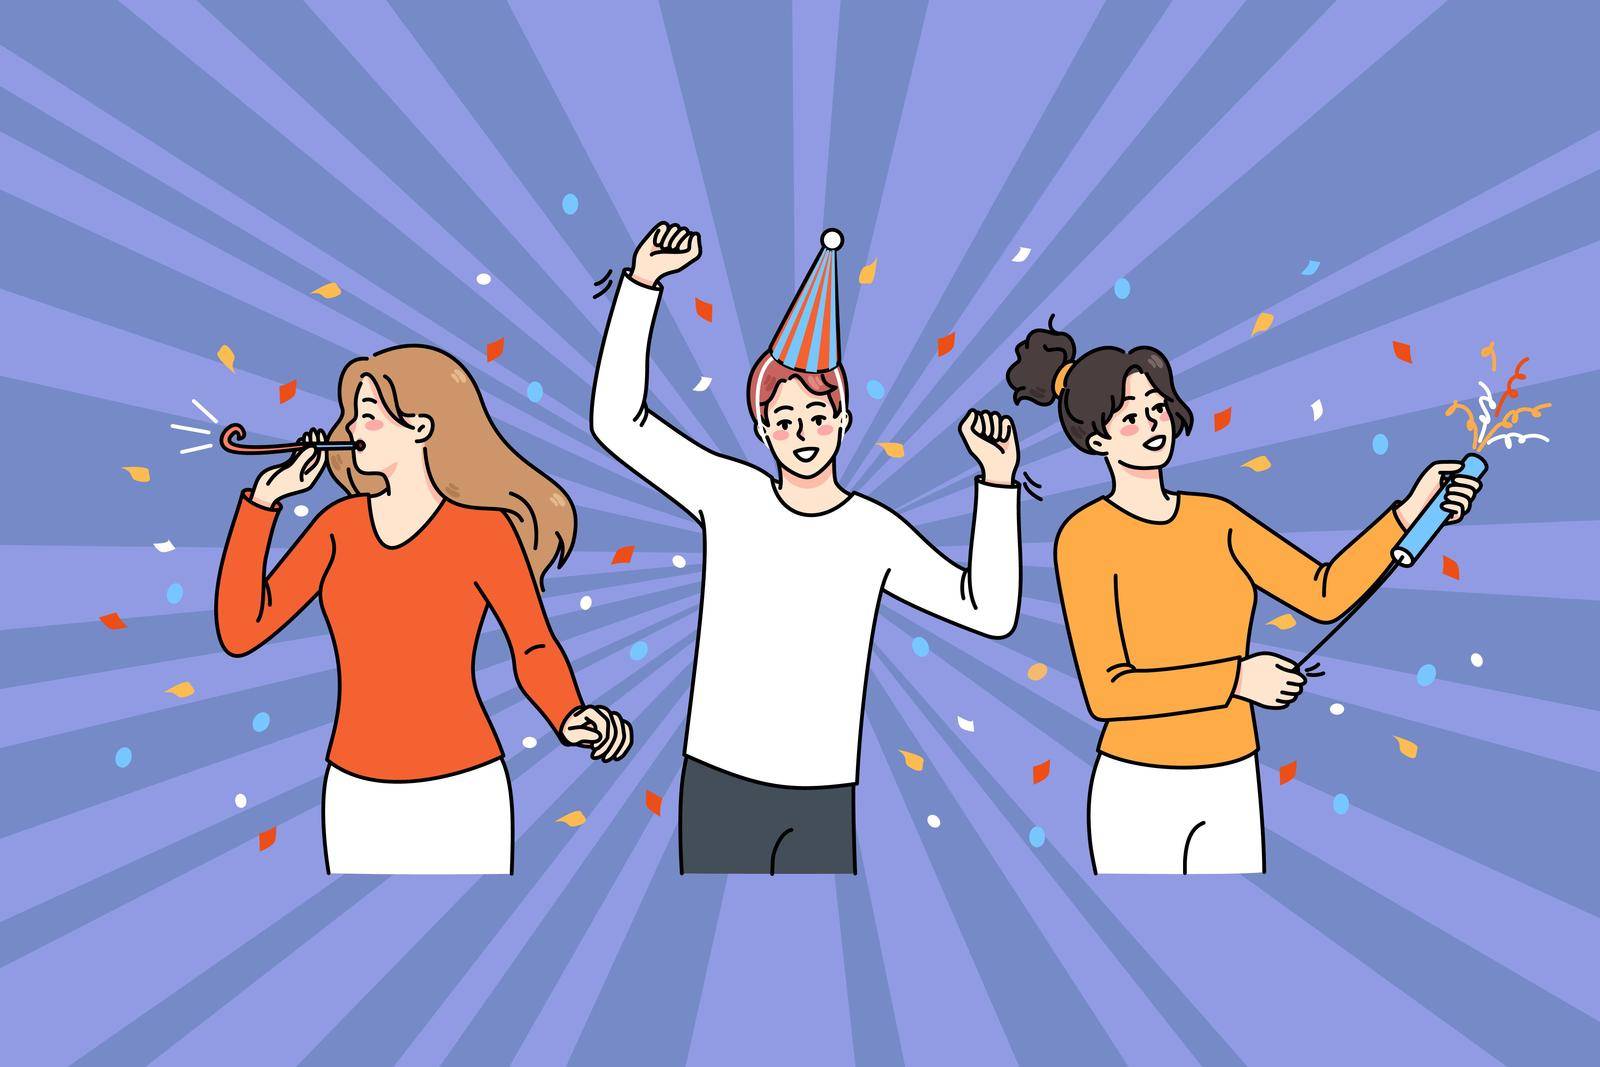 Overjoyed diverse young people have fun celebrate together. Smiling men and women enjoy celebration or party dancing and entertaining. Friendship and entertainment. Vector illustration.